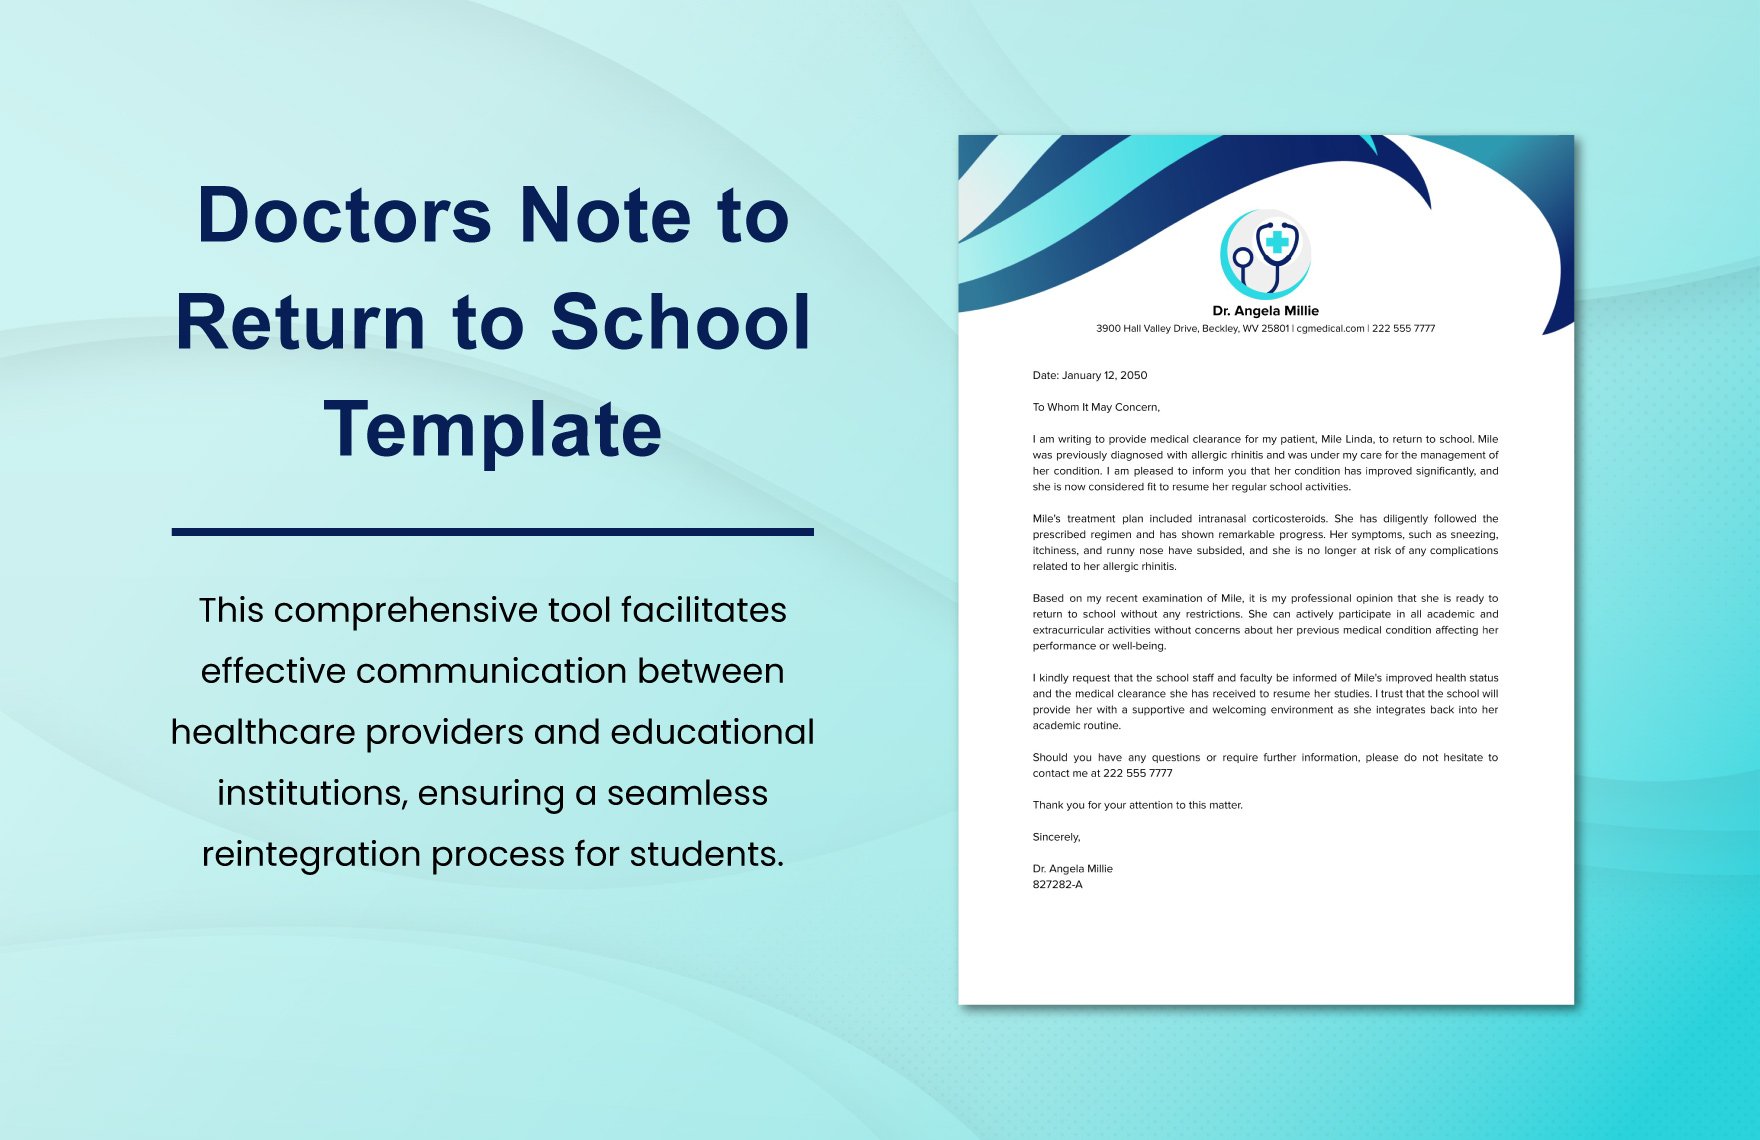 Doctors Note to Return to School Template